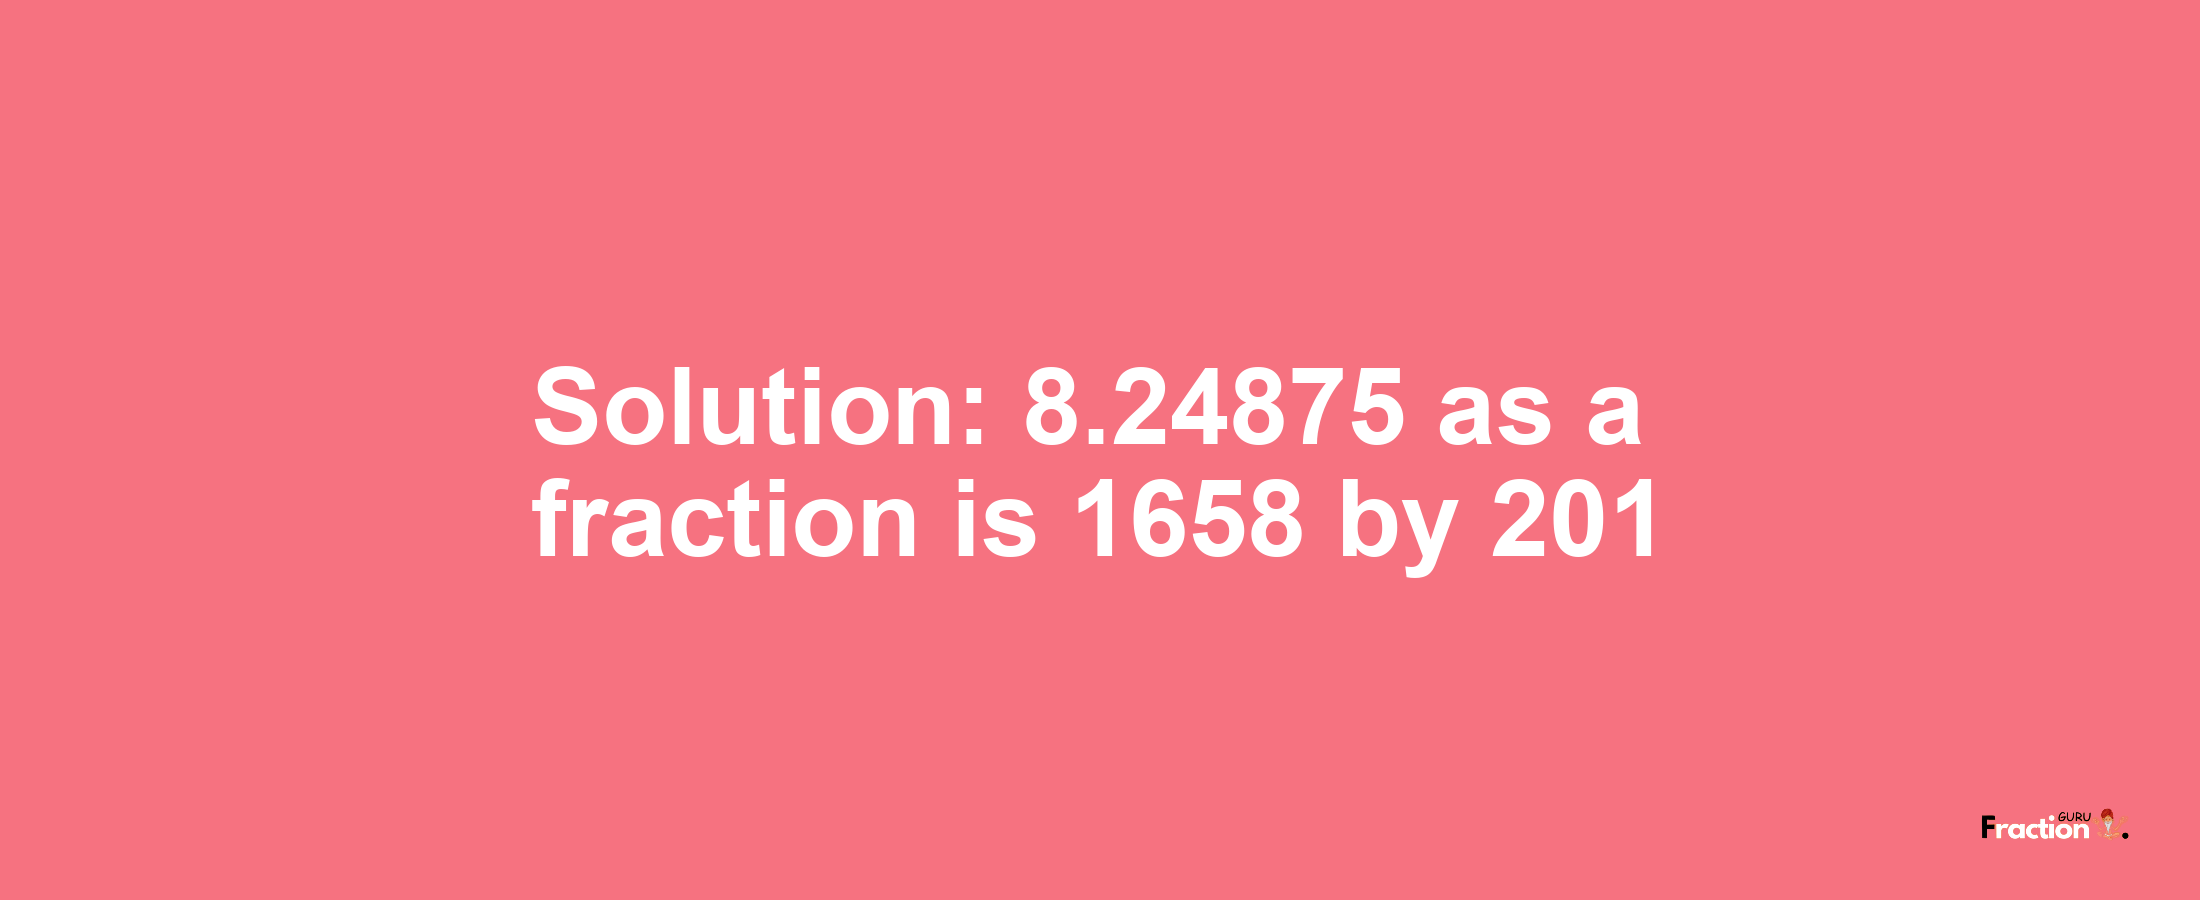 Solution:8.24875 as a fraction is 1658/201